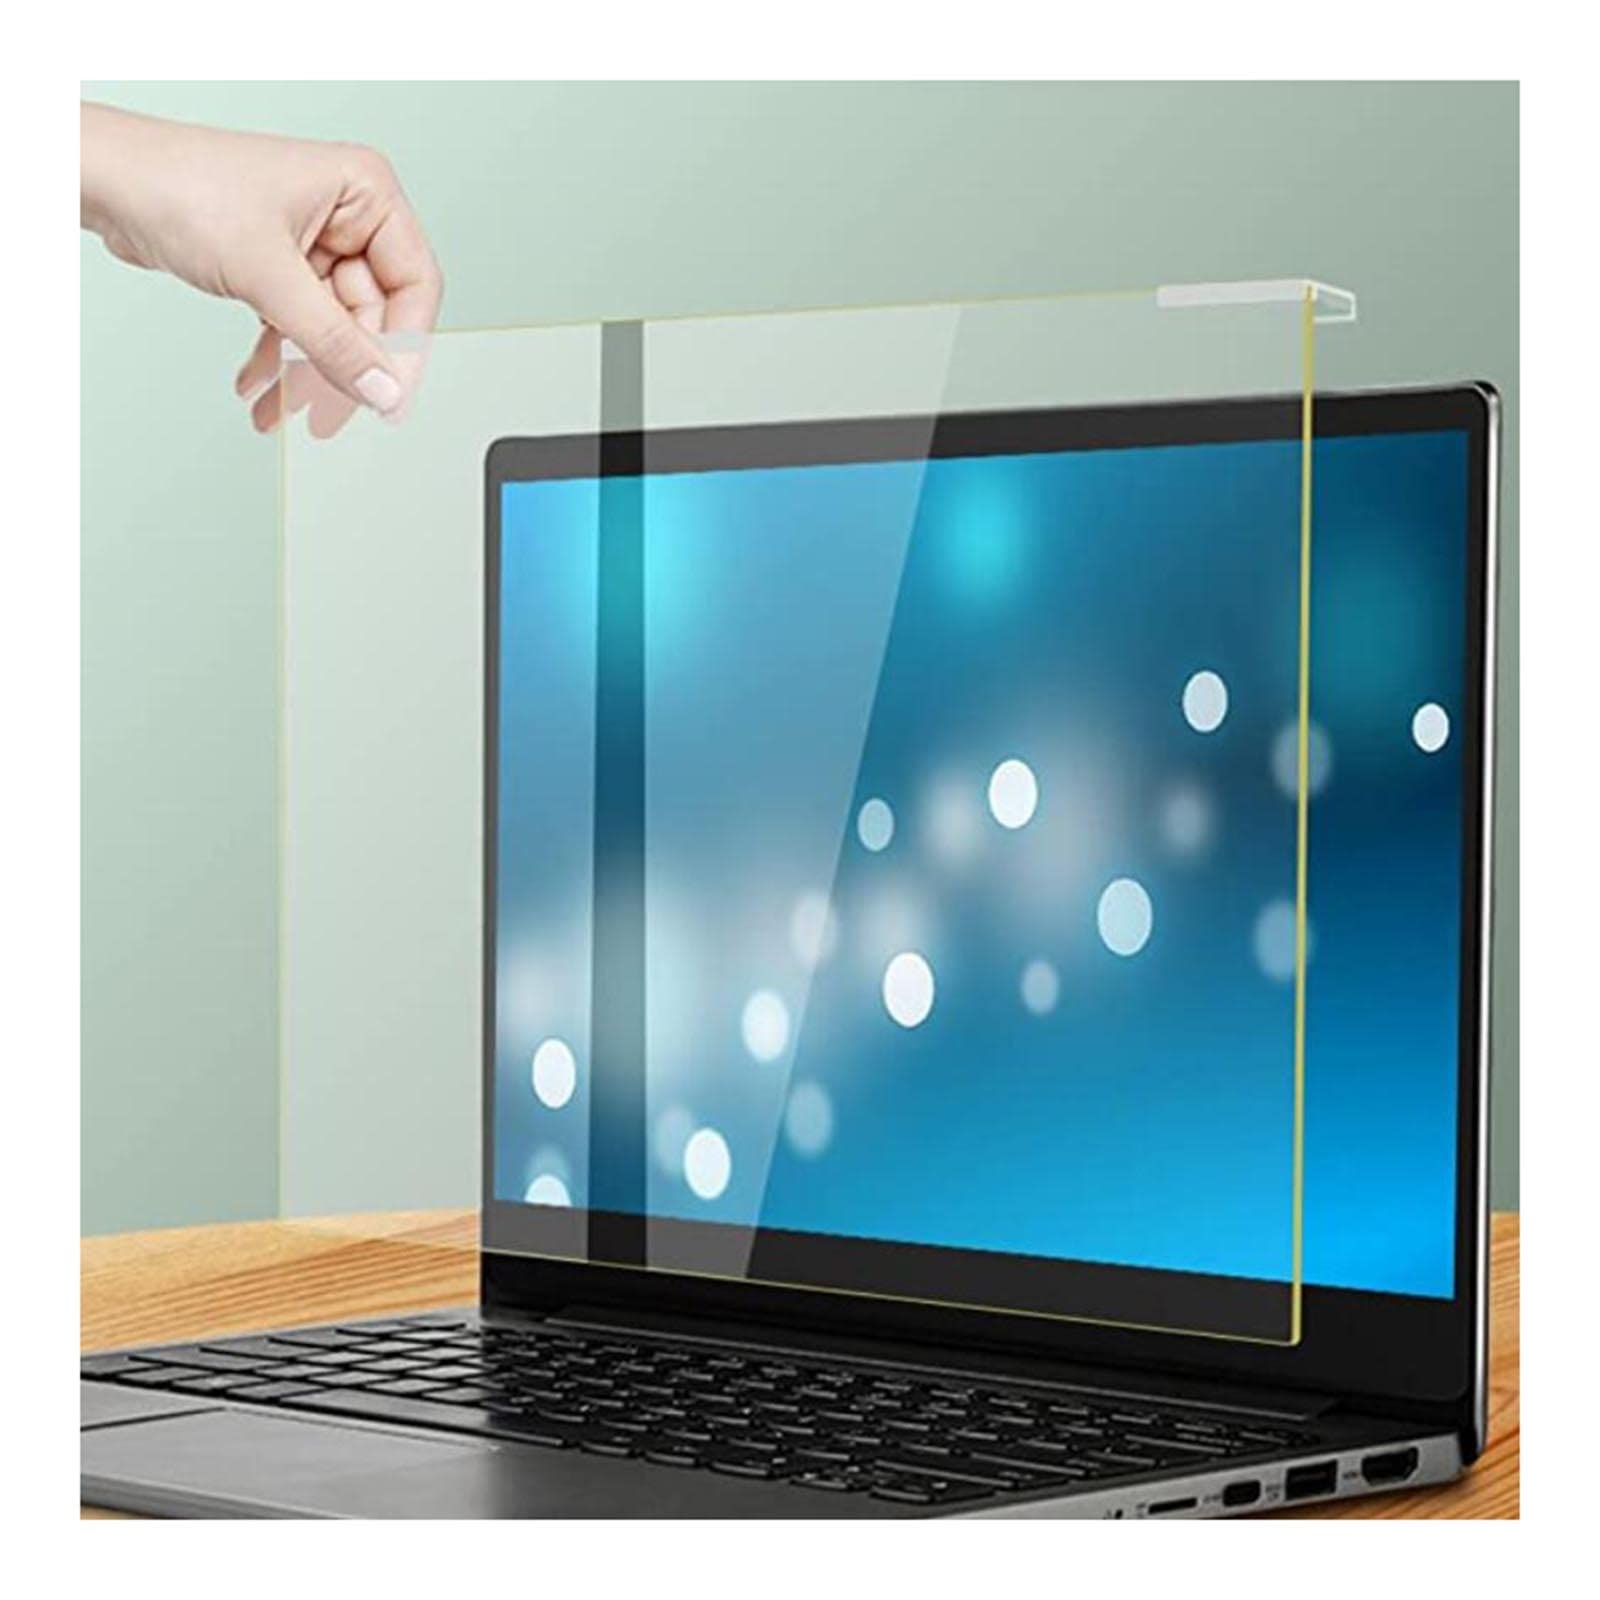 LIGUOYI Bubble-Free Antis-Blue Light Filter and Antis-Glare Screen Protector for LED Screens 15.6 Inch Laptop, Antis-UV Eye Protection Protective Film, Removable, Wiederverwendbar